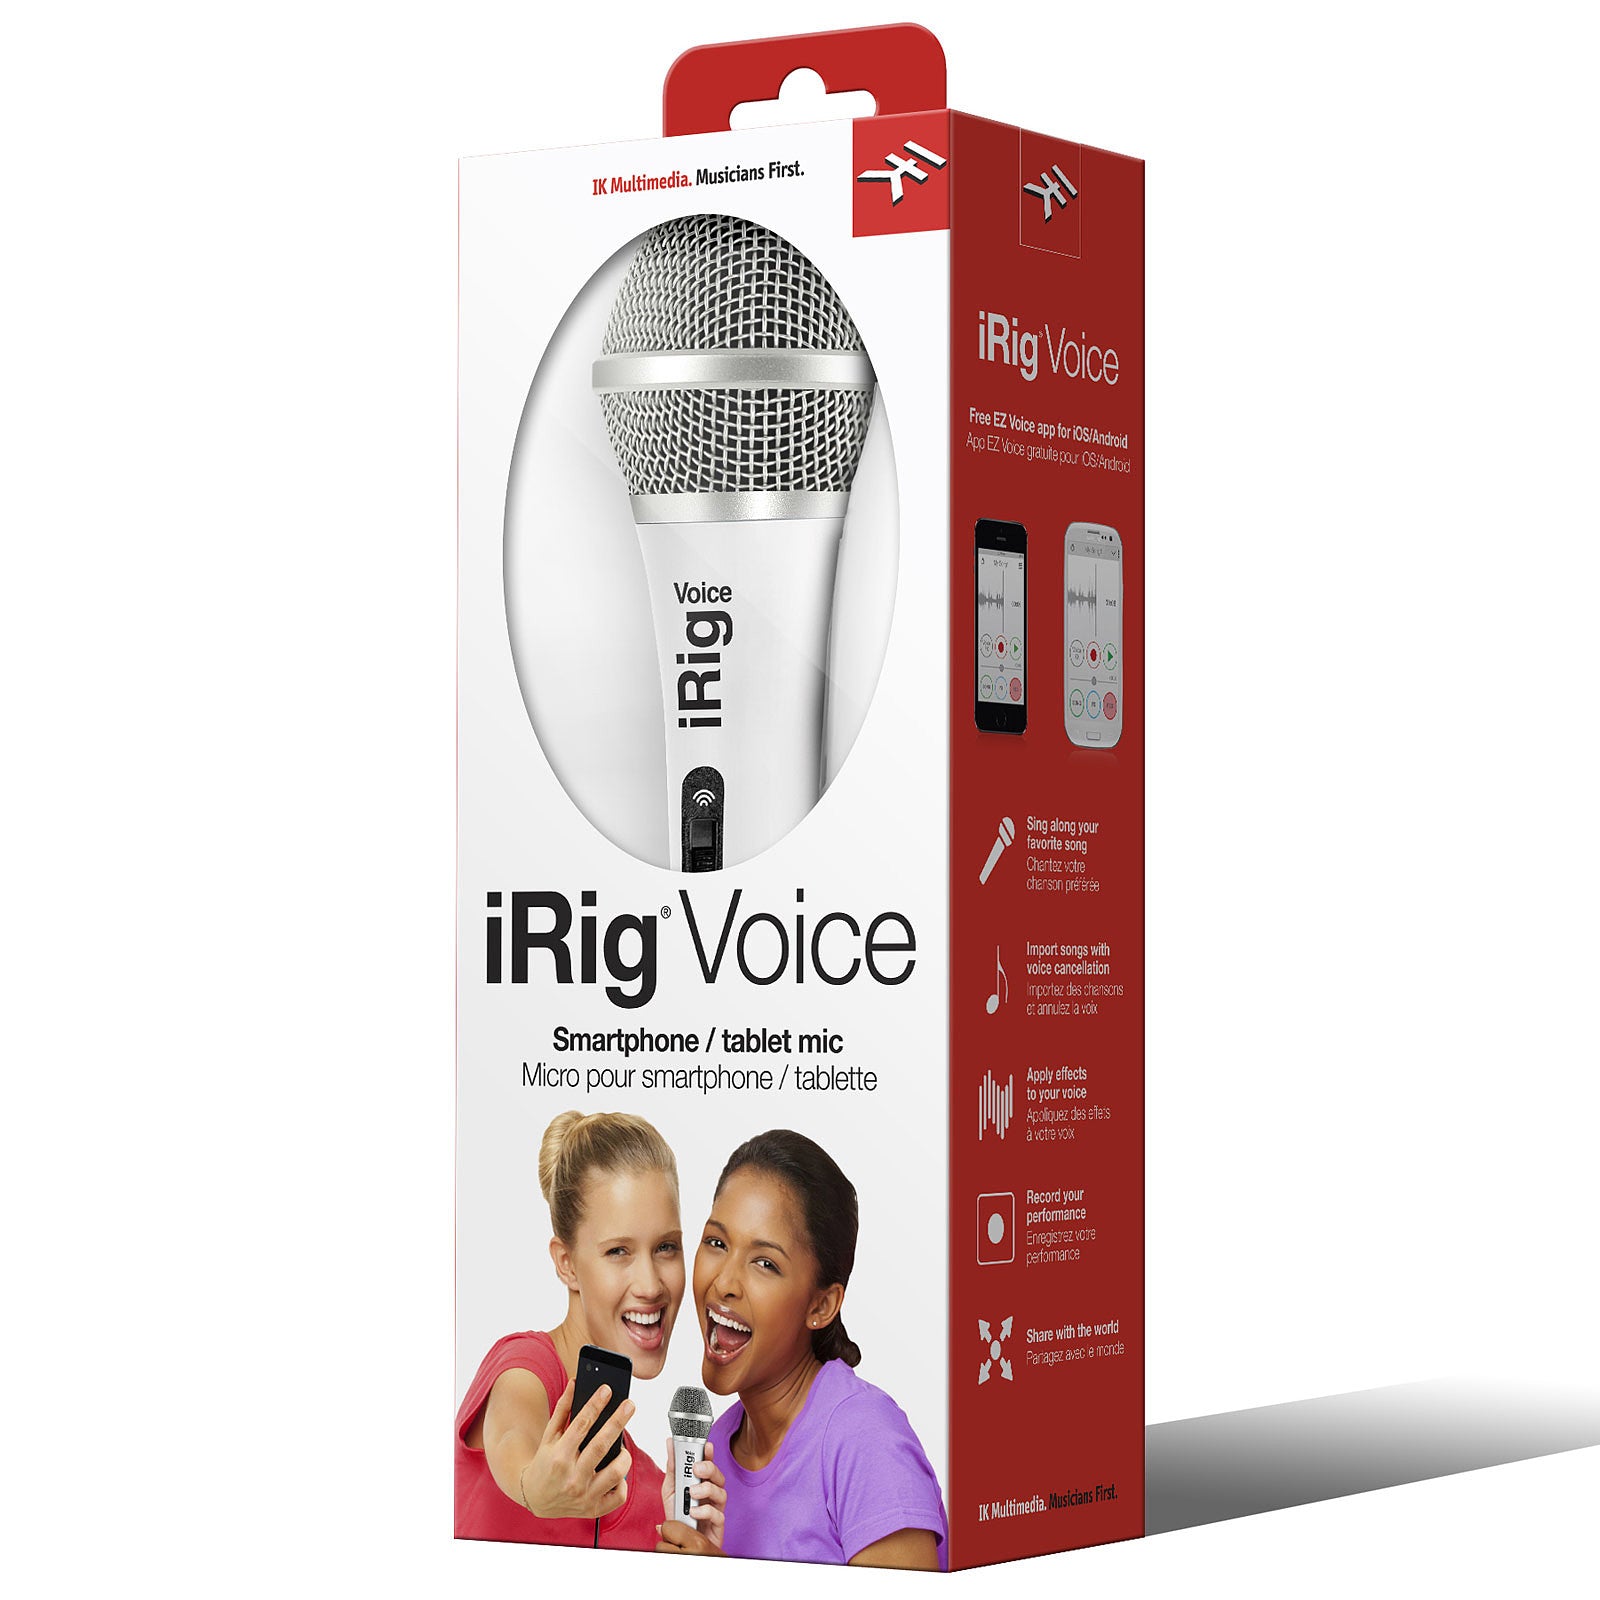 IK Multimedia iRig Voice Handheld Microphone, White (For Iphone / Ipod-Touch / Ipad), IK MULTIMEDIA, MADE FOR iOS, ik-multimedia-irig-voice-handheld-microphone-white-for-iphone-ipod-touch-ipad, ZOSO MUSIC SDN BHD